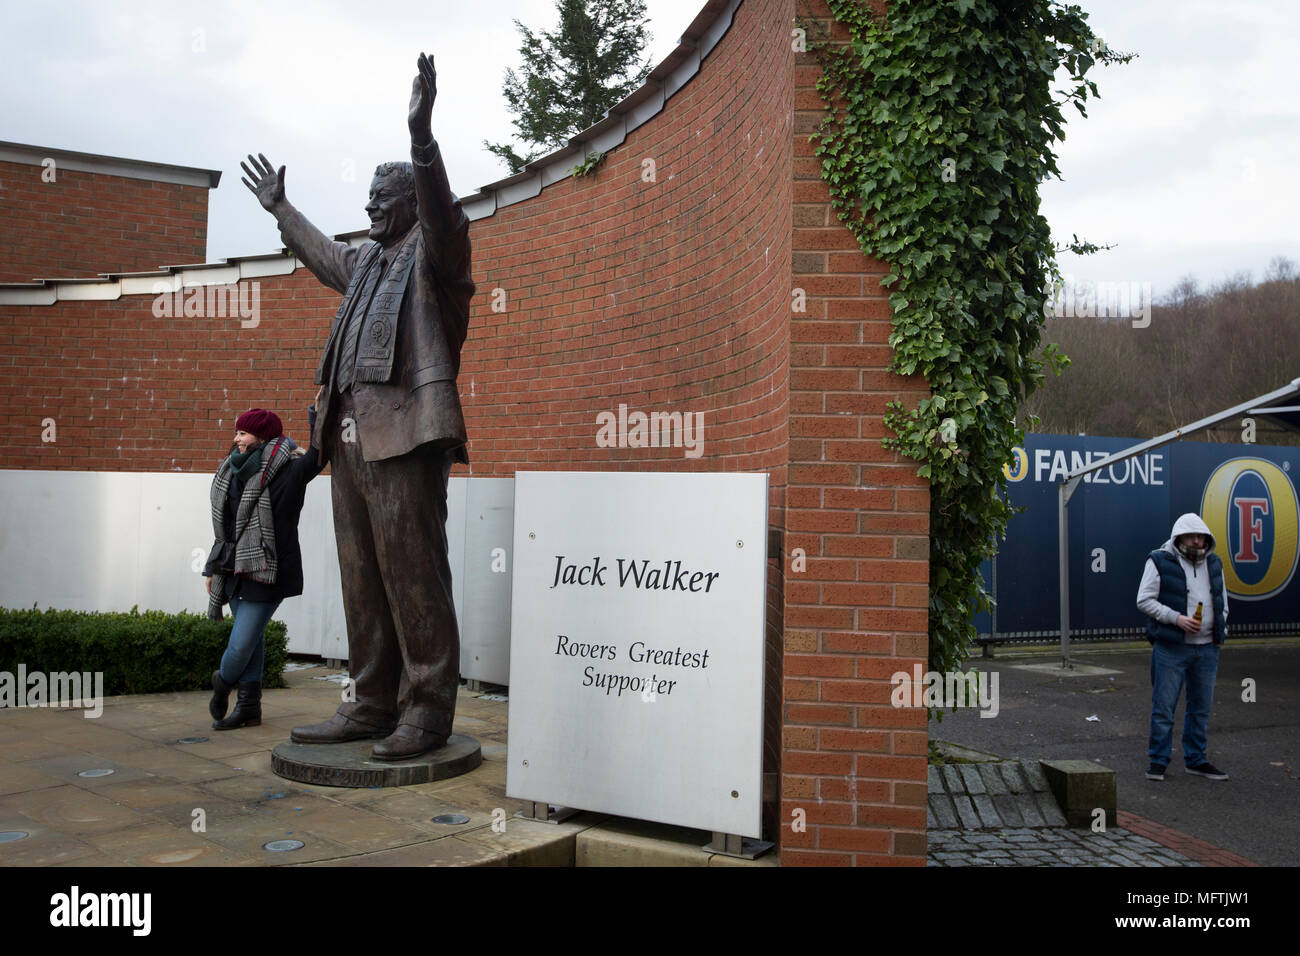 The statue dedicated to Jack Walker, the club's former owner, which is situated at the back of the Blackburn End Stand before Blackburn Rovers played Shrewsbury Town in a Sky Bet League One fixture at Ewood Park. Both team were in the top three in the division at the start of the game. Blackburn won the match by 3 goals to 1, watched by a crowd of 13,579. Stock Photo